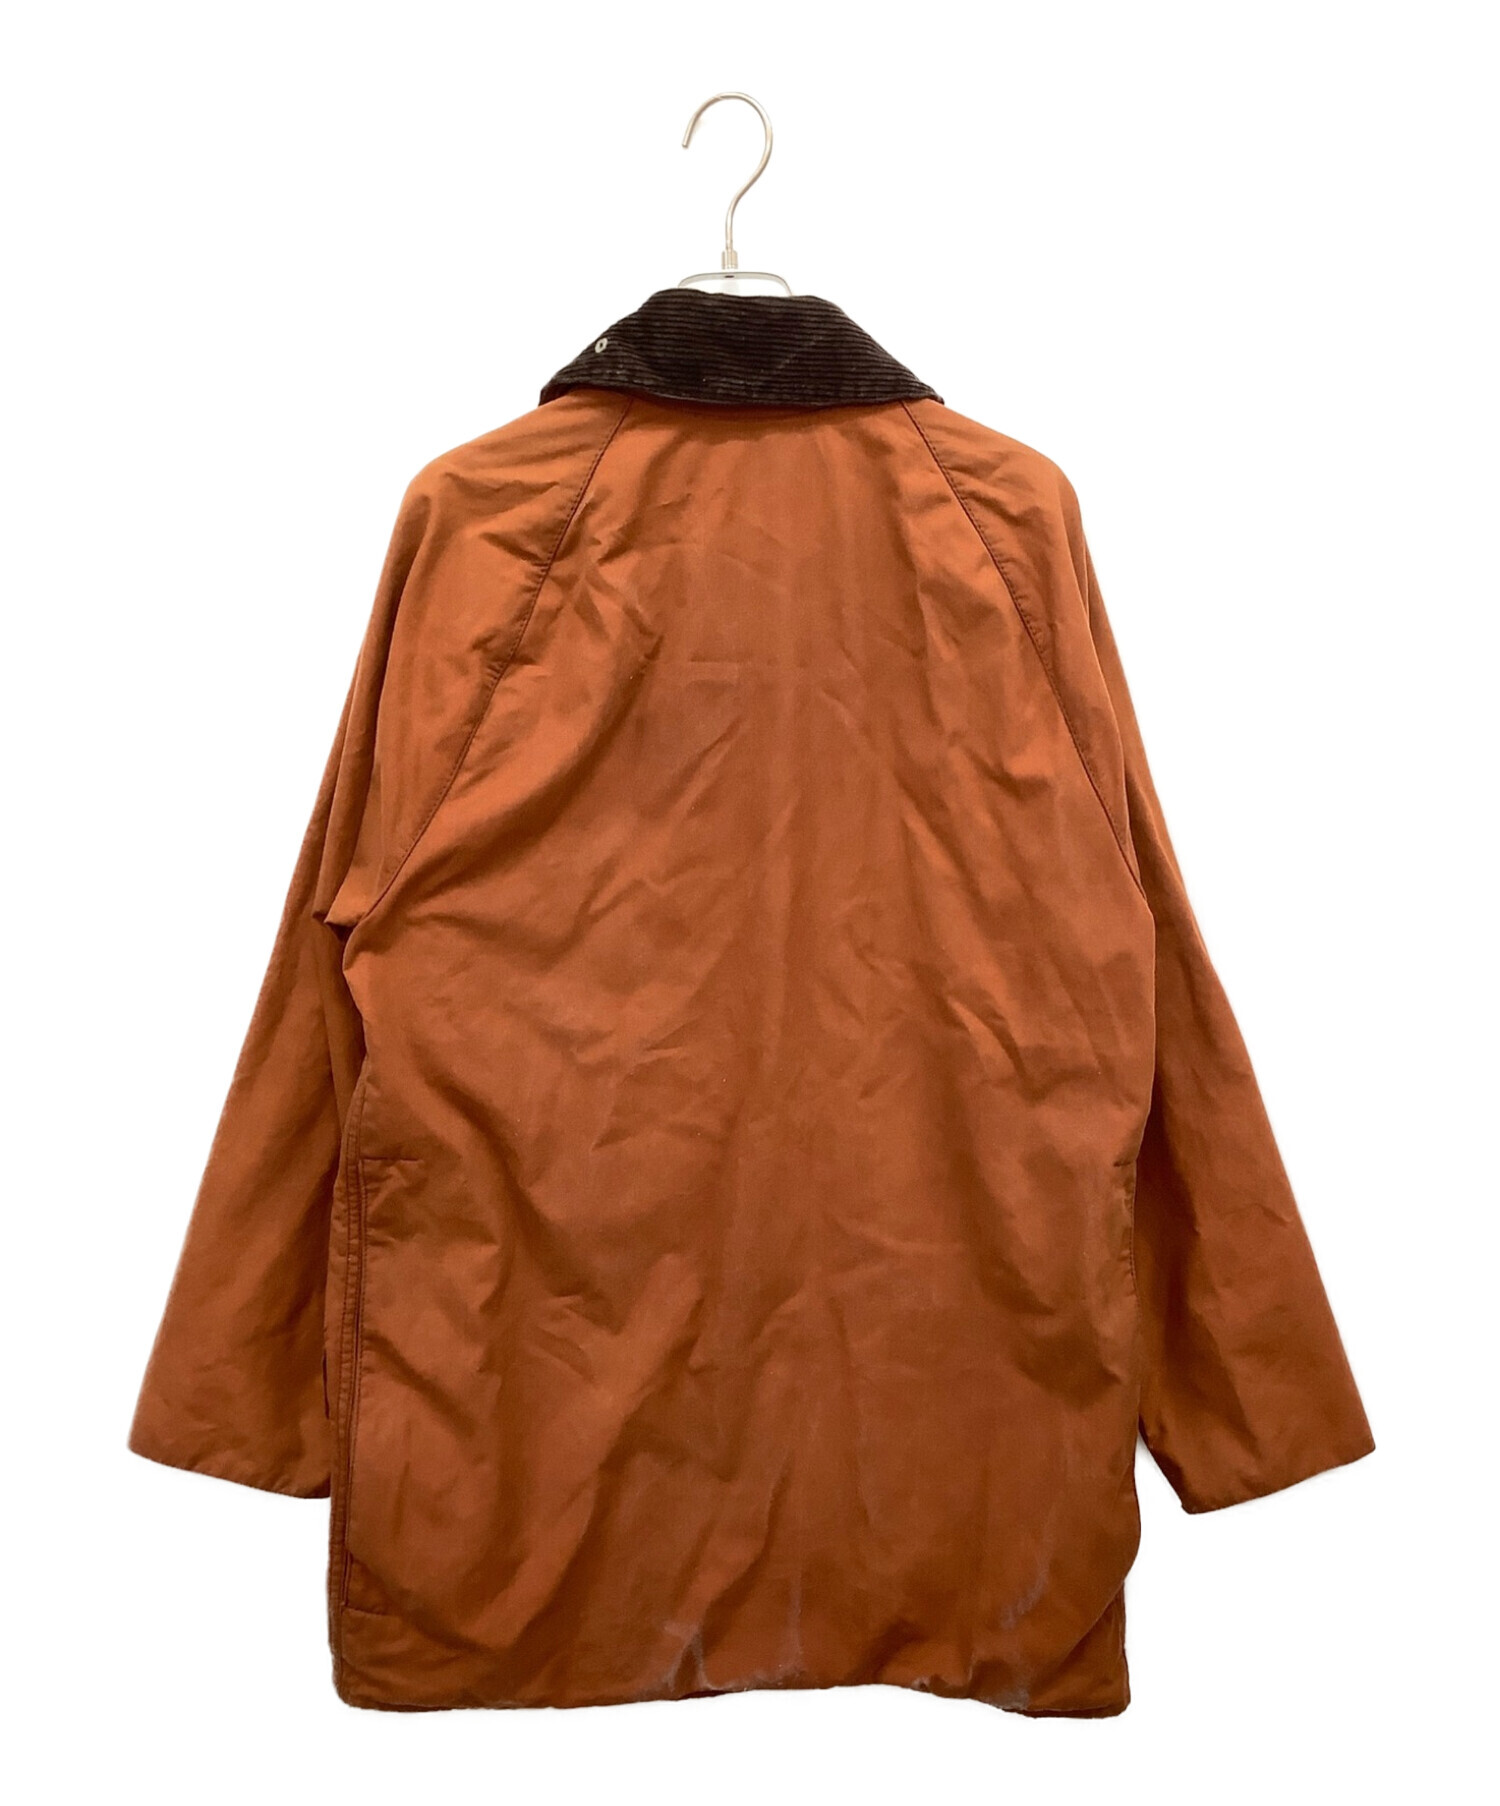 Barbour CLASSIC BEDALE ブラウン C36 | www.innoveering.net